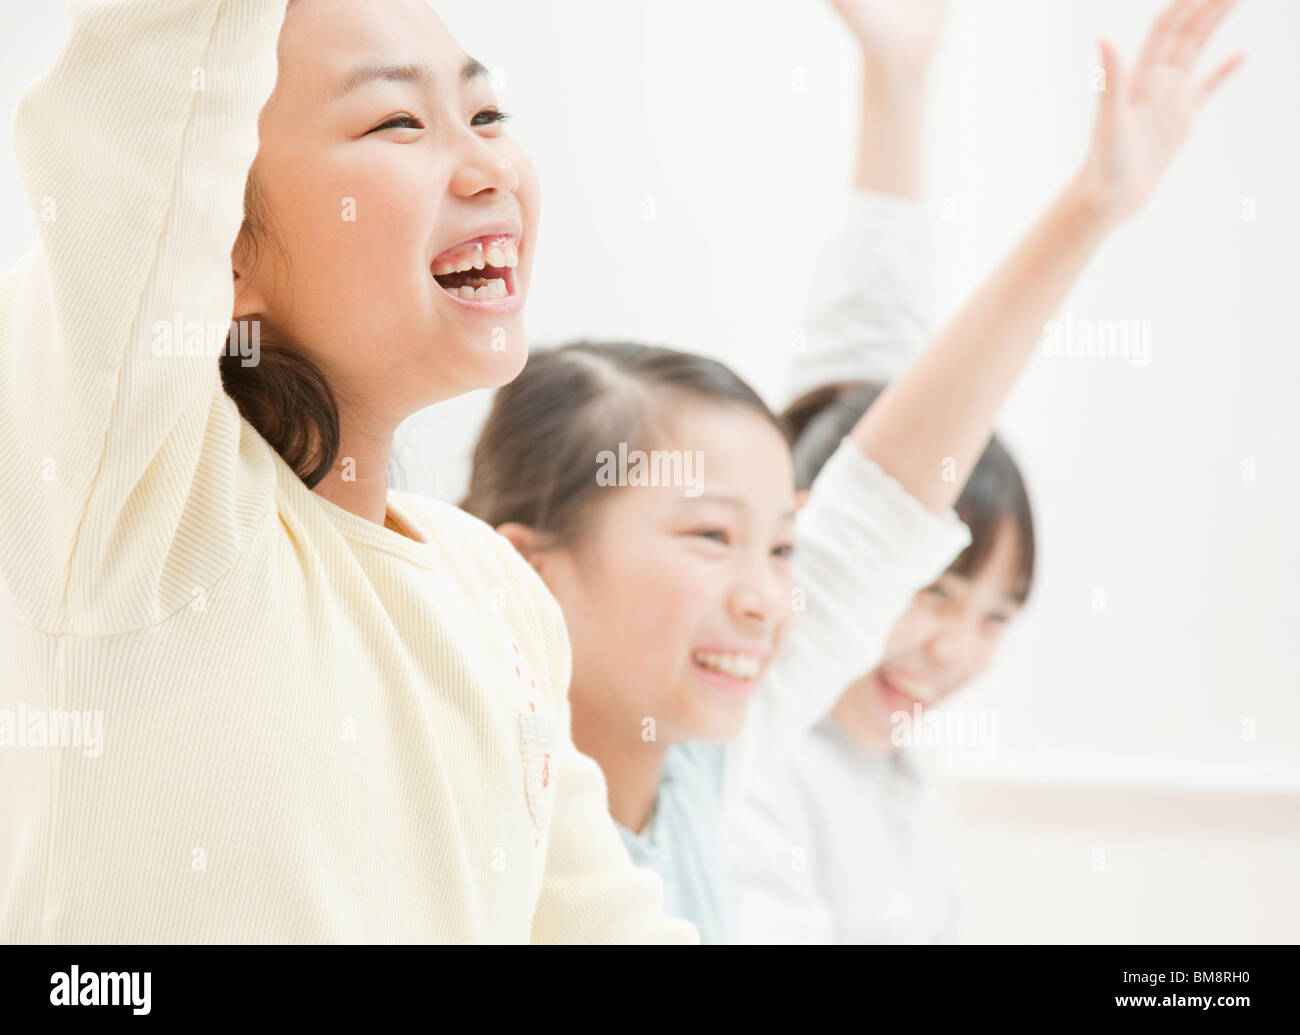 Girls Studying at Desk, Putting Their Hands Up Stock Photo